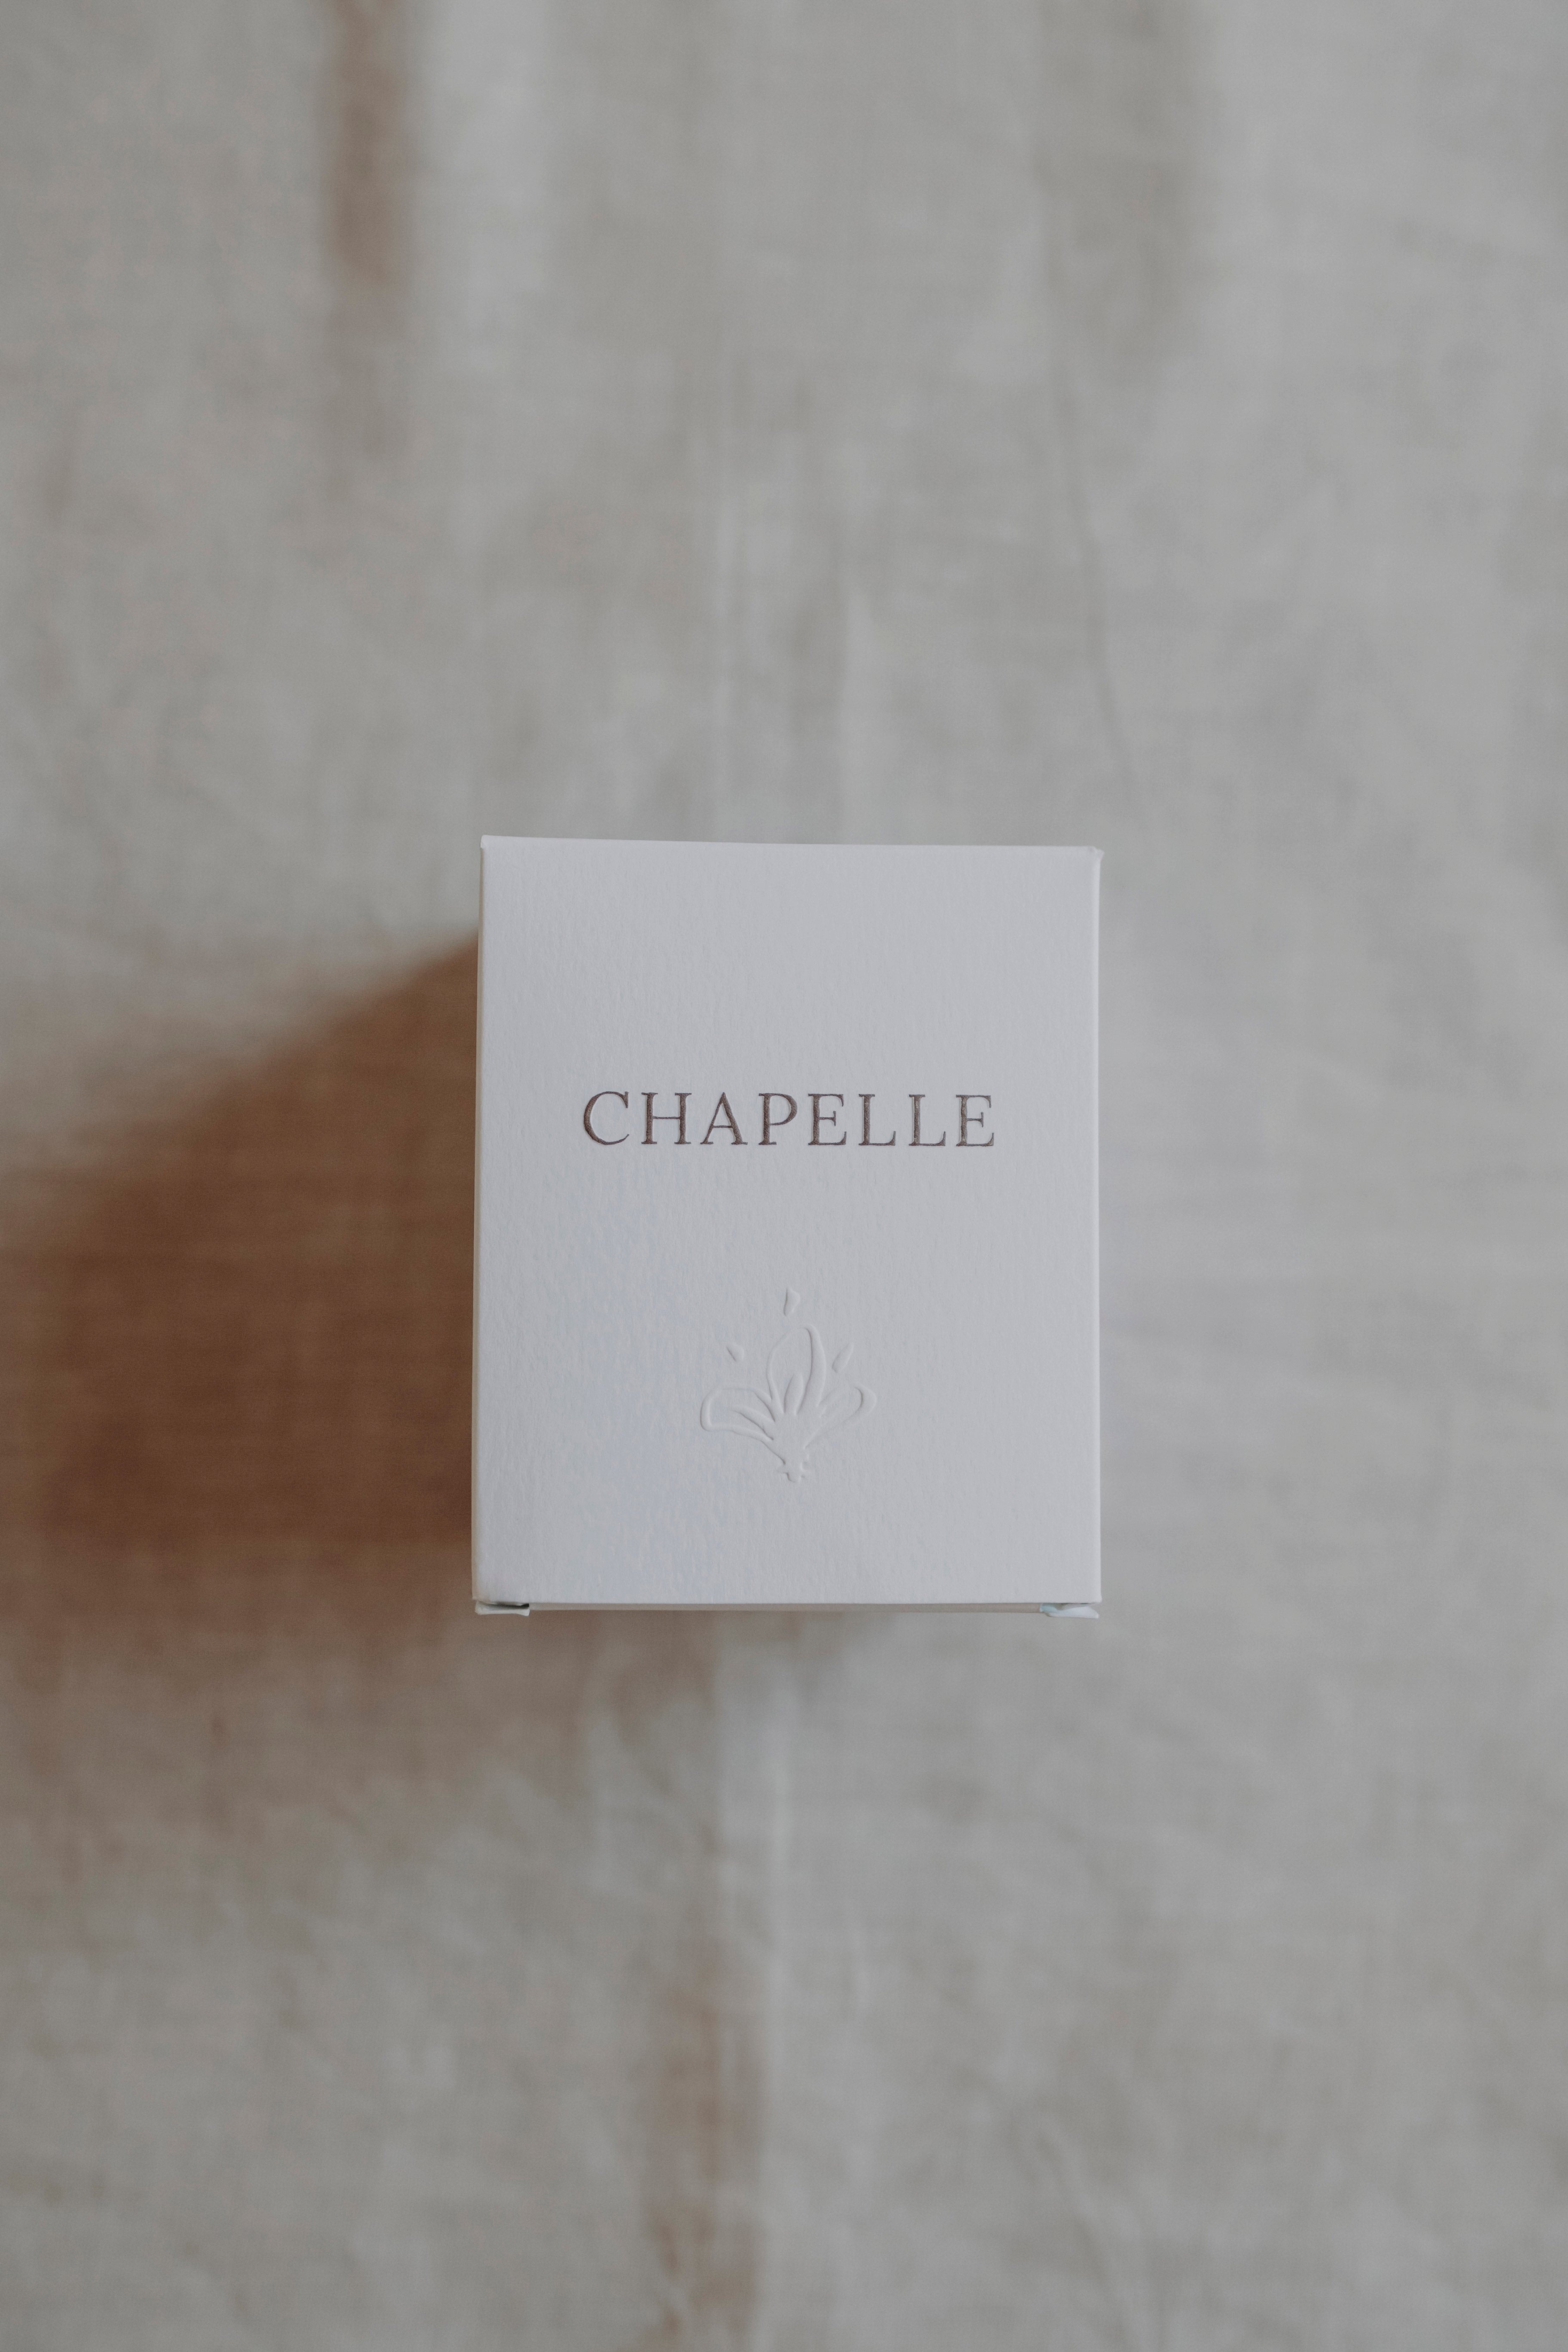 CHAPELLE CANDLE